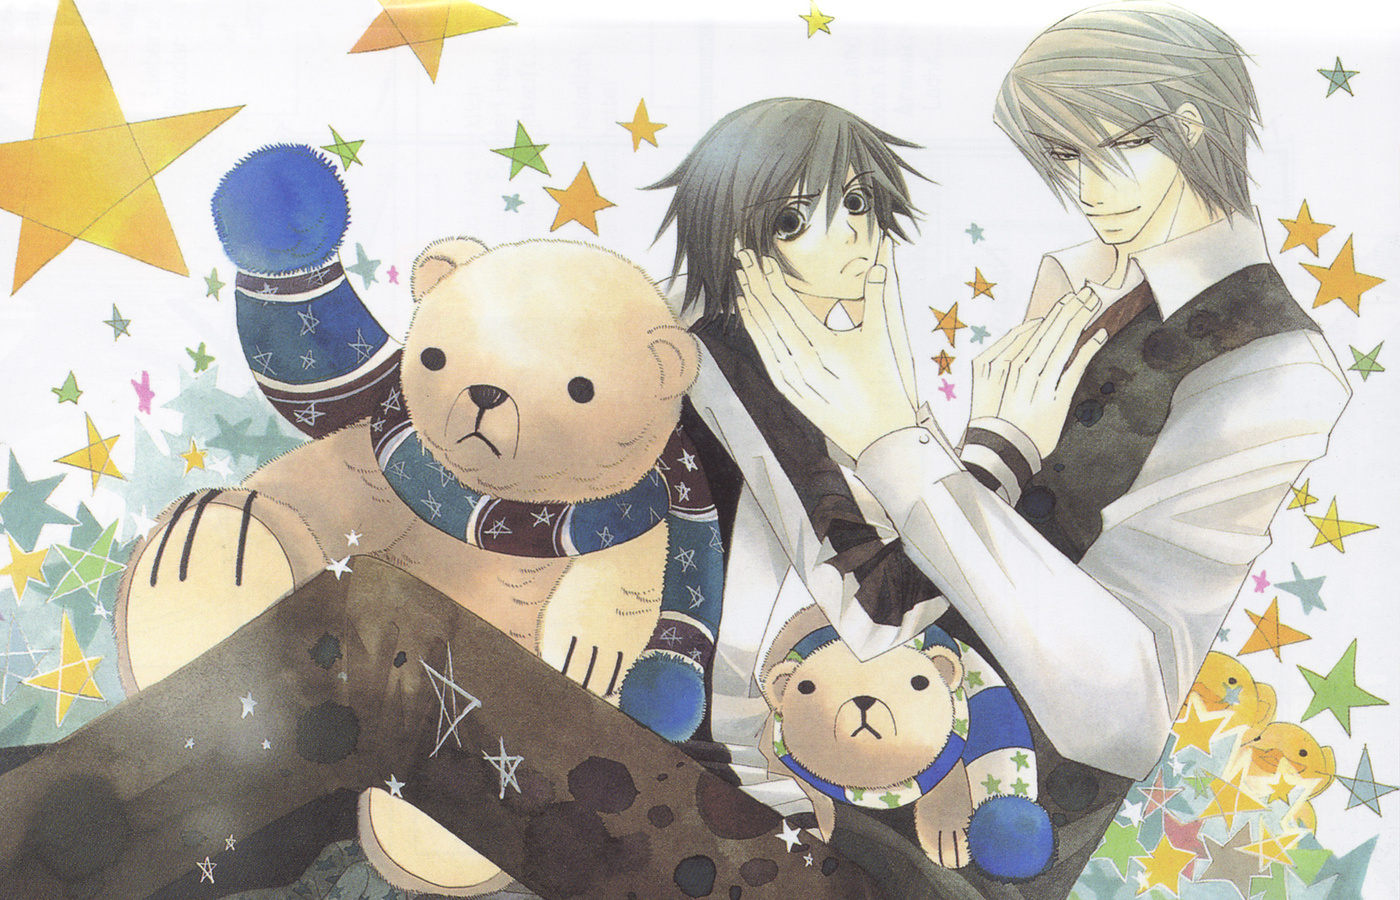 Junjou Romantica Wallpapers High Quality | Download Free
